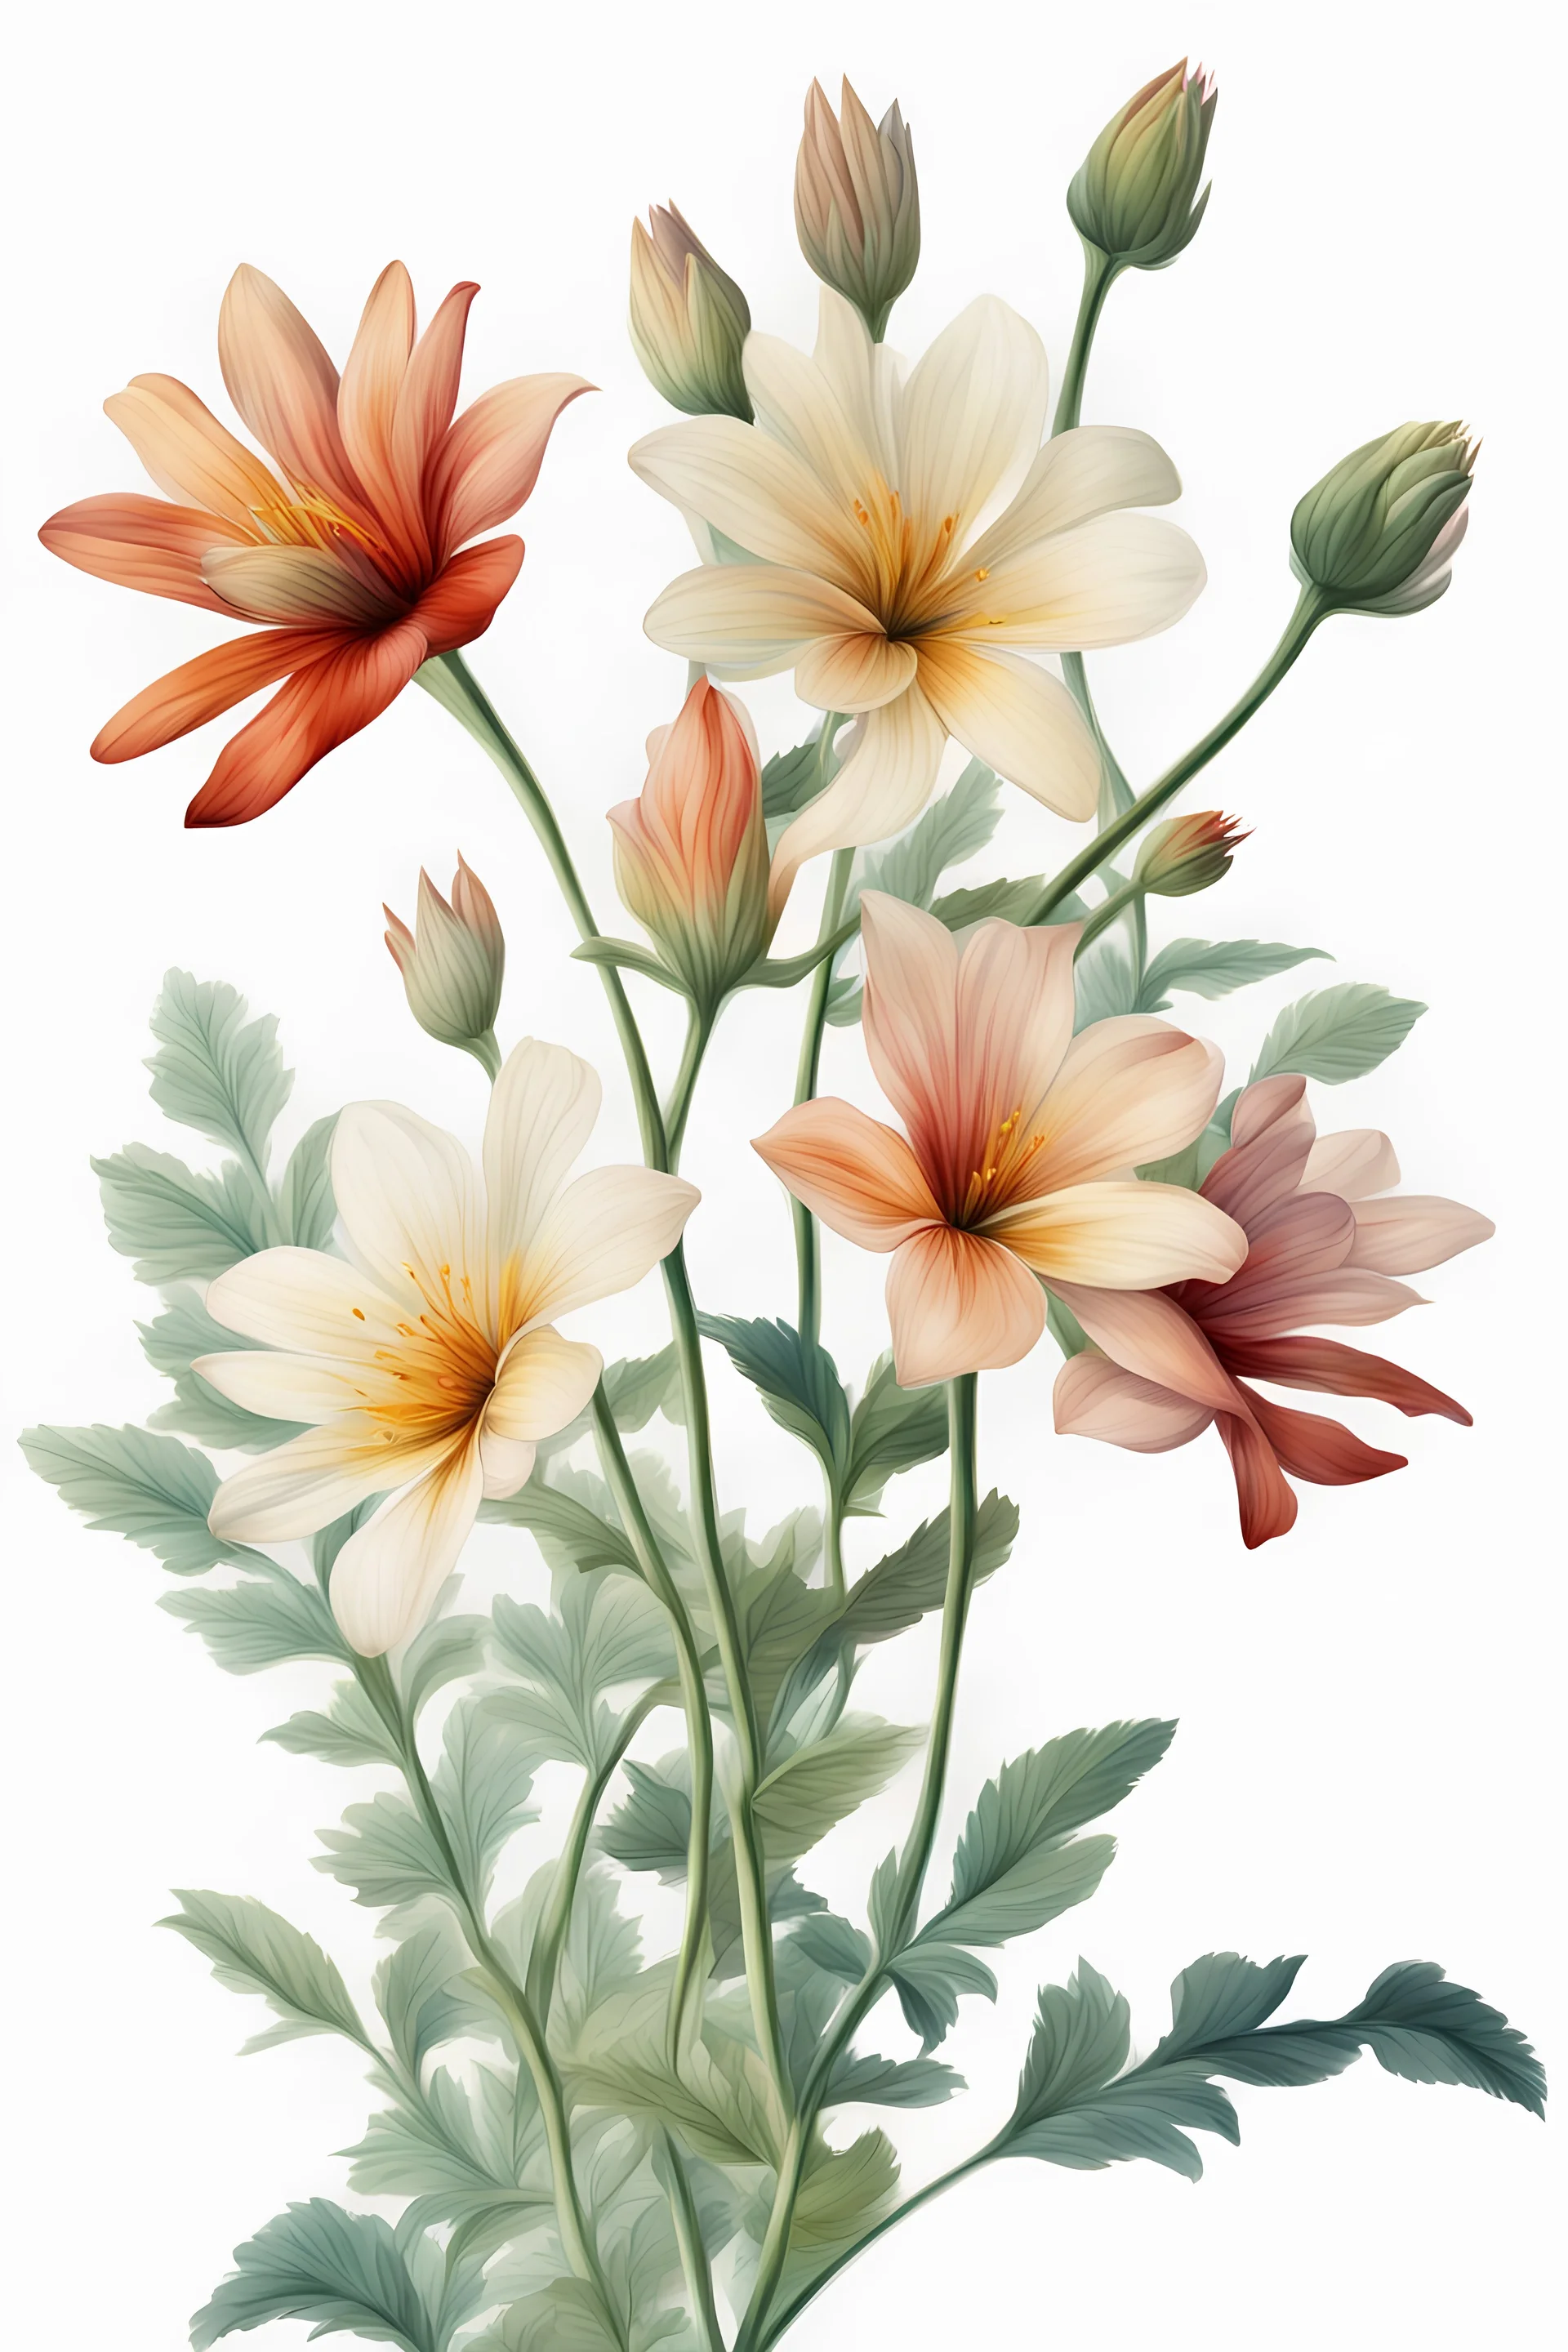 generate an image of a rare flower ; realistic style, white background bright colors